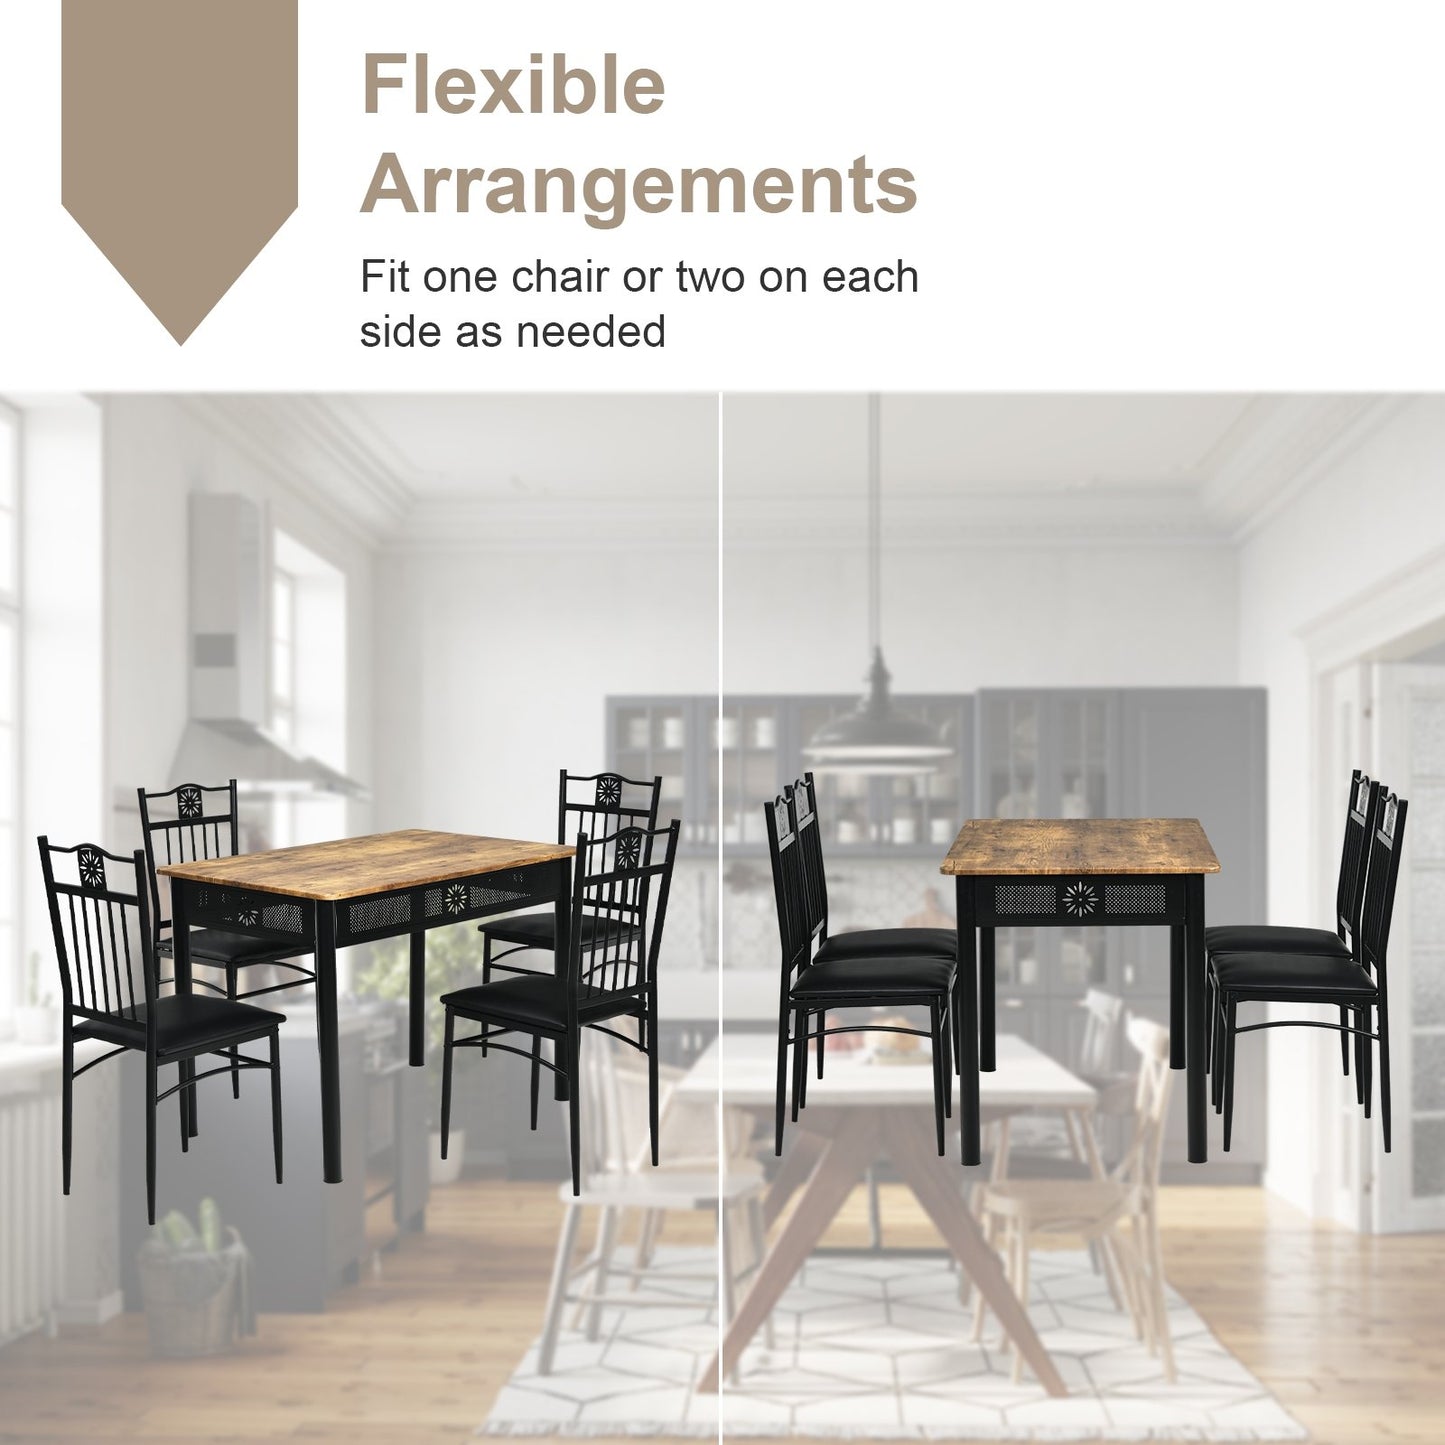 5 Pcs Dining Set Wood Metal Table and 4 Chairs with Cushions, Black - Gallery Canada